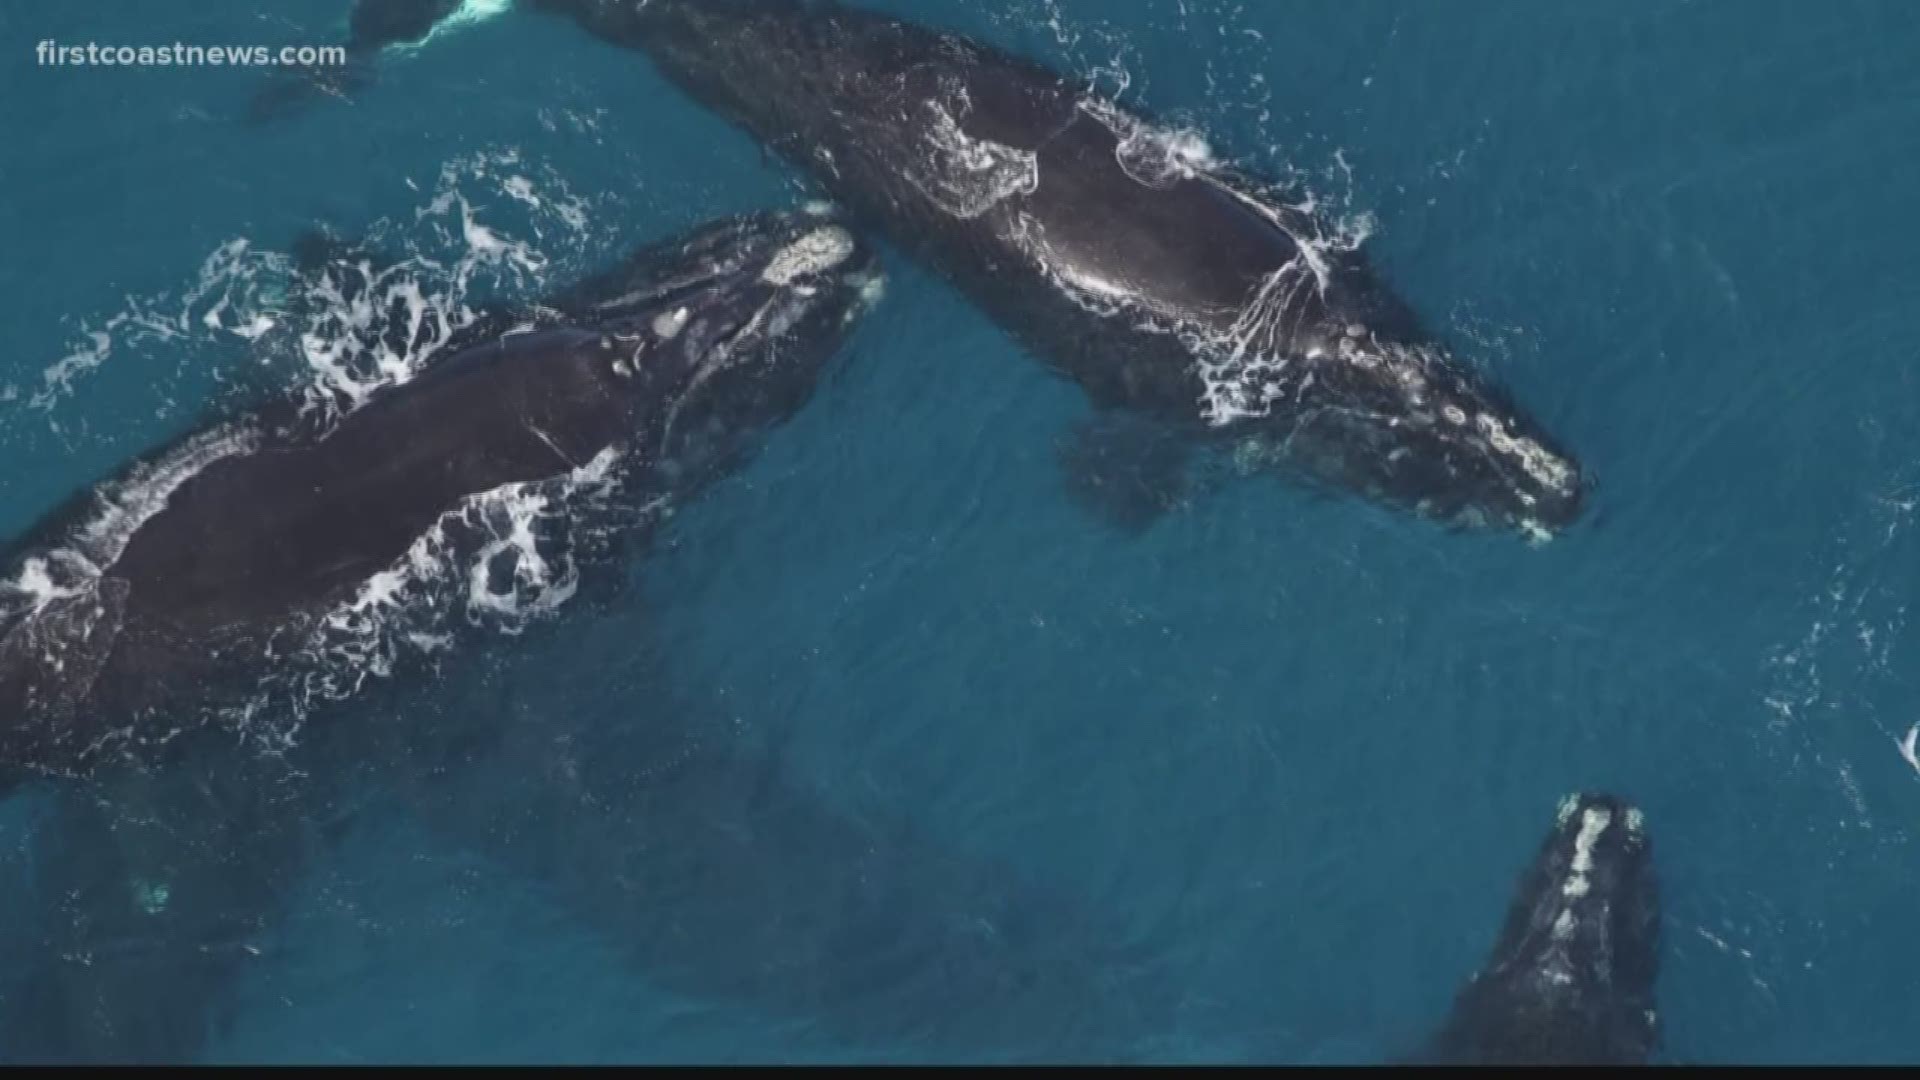 The North Atlantic Right Whale is already critically endangered, and on average, they birthed 17 calves each year for the past three decades.